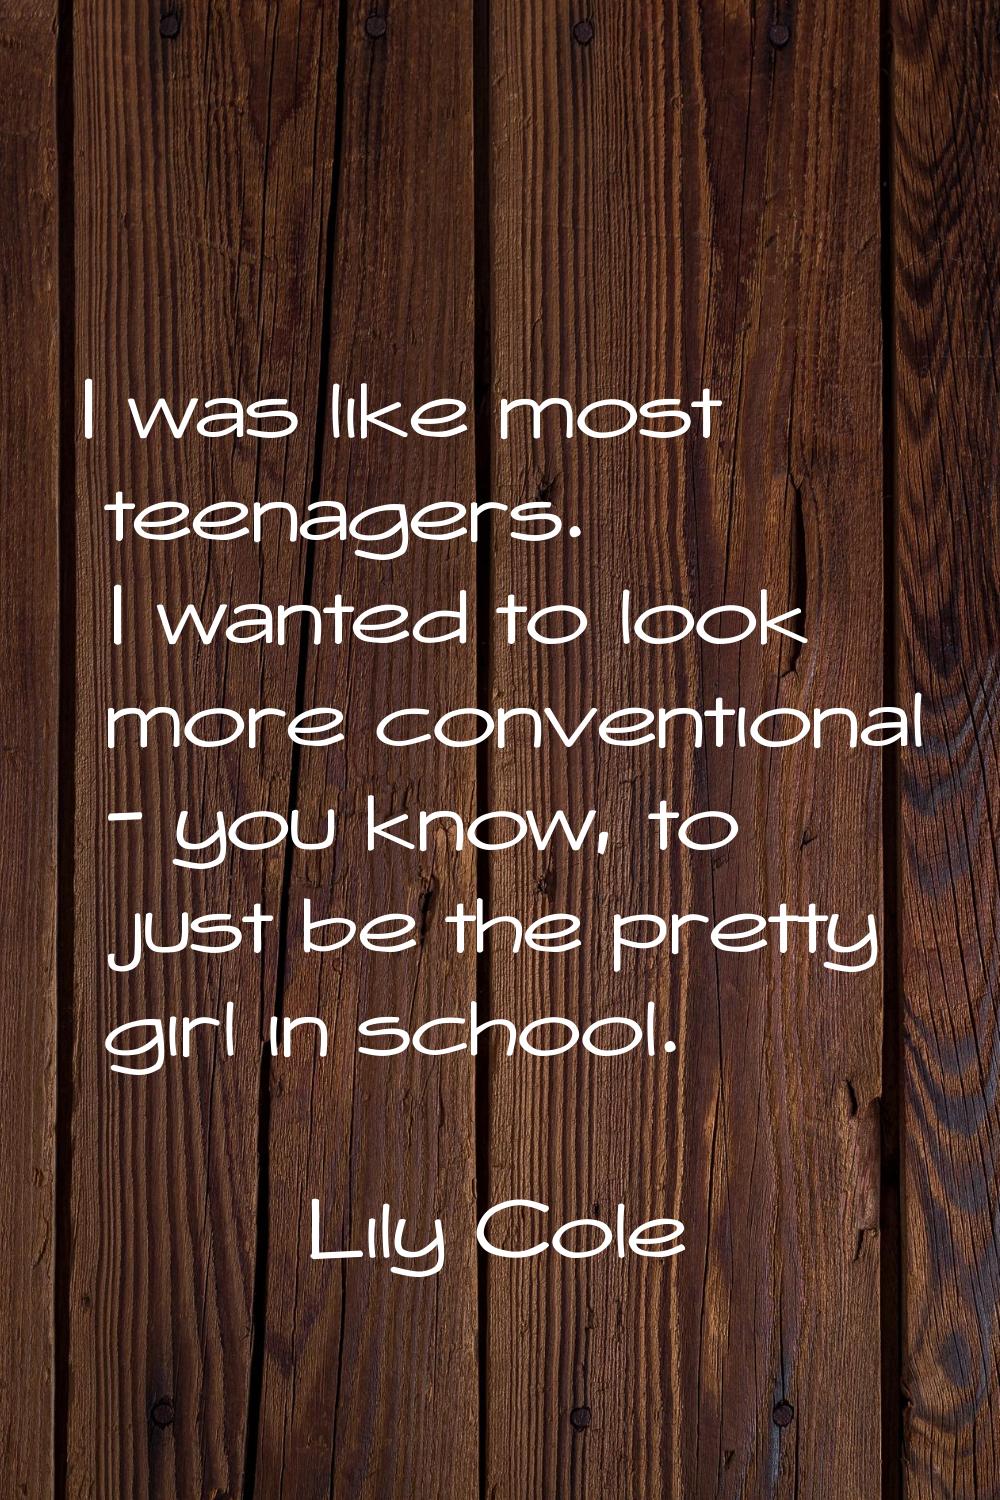 I was like most teenagers. I wanted to look more conventional - you know, to just be the pretty gir